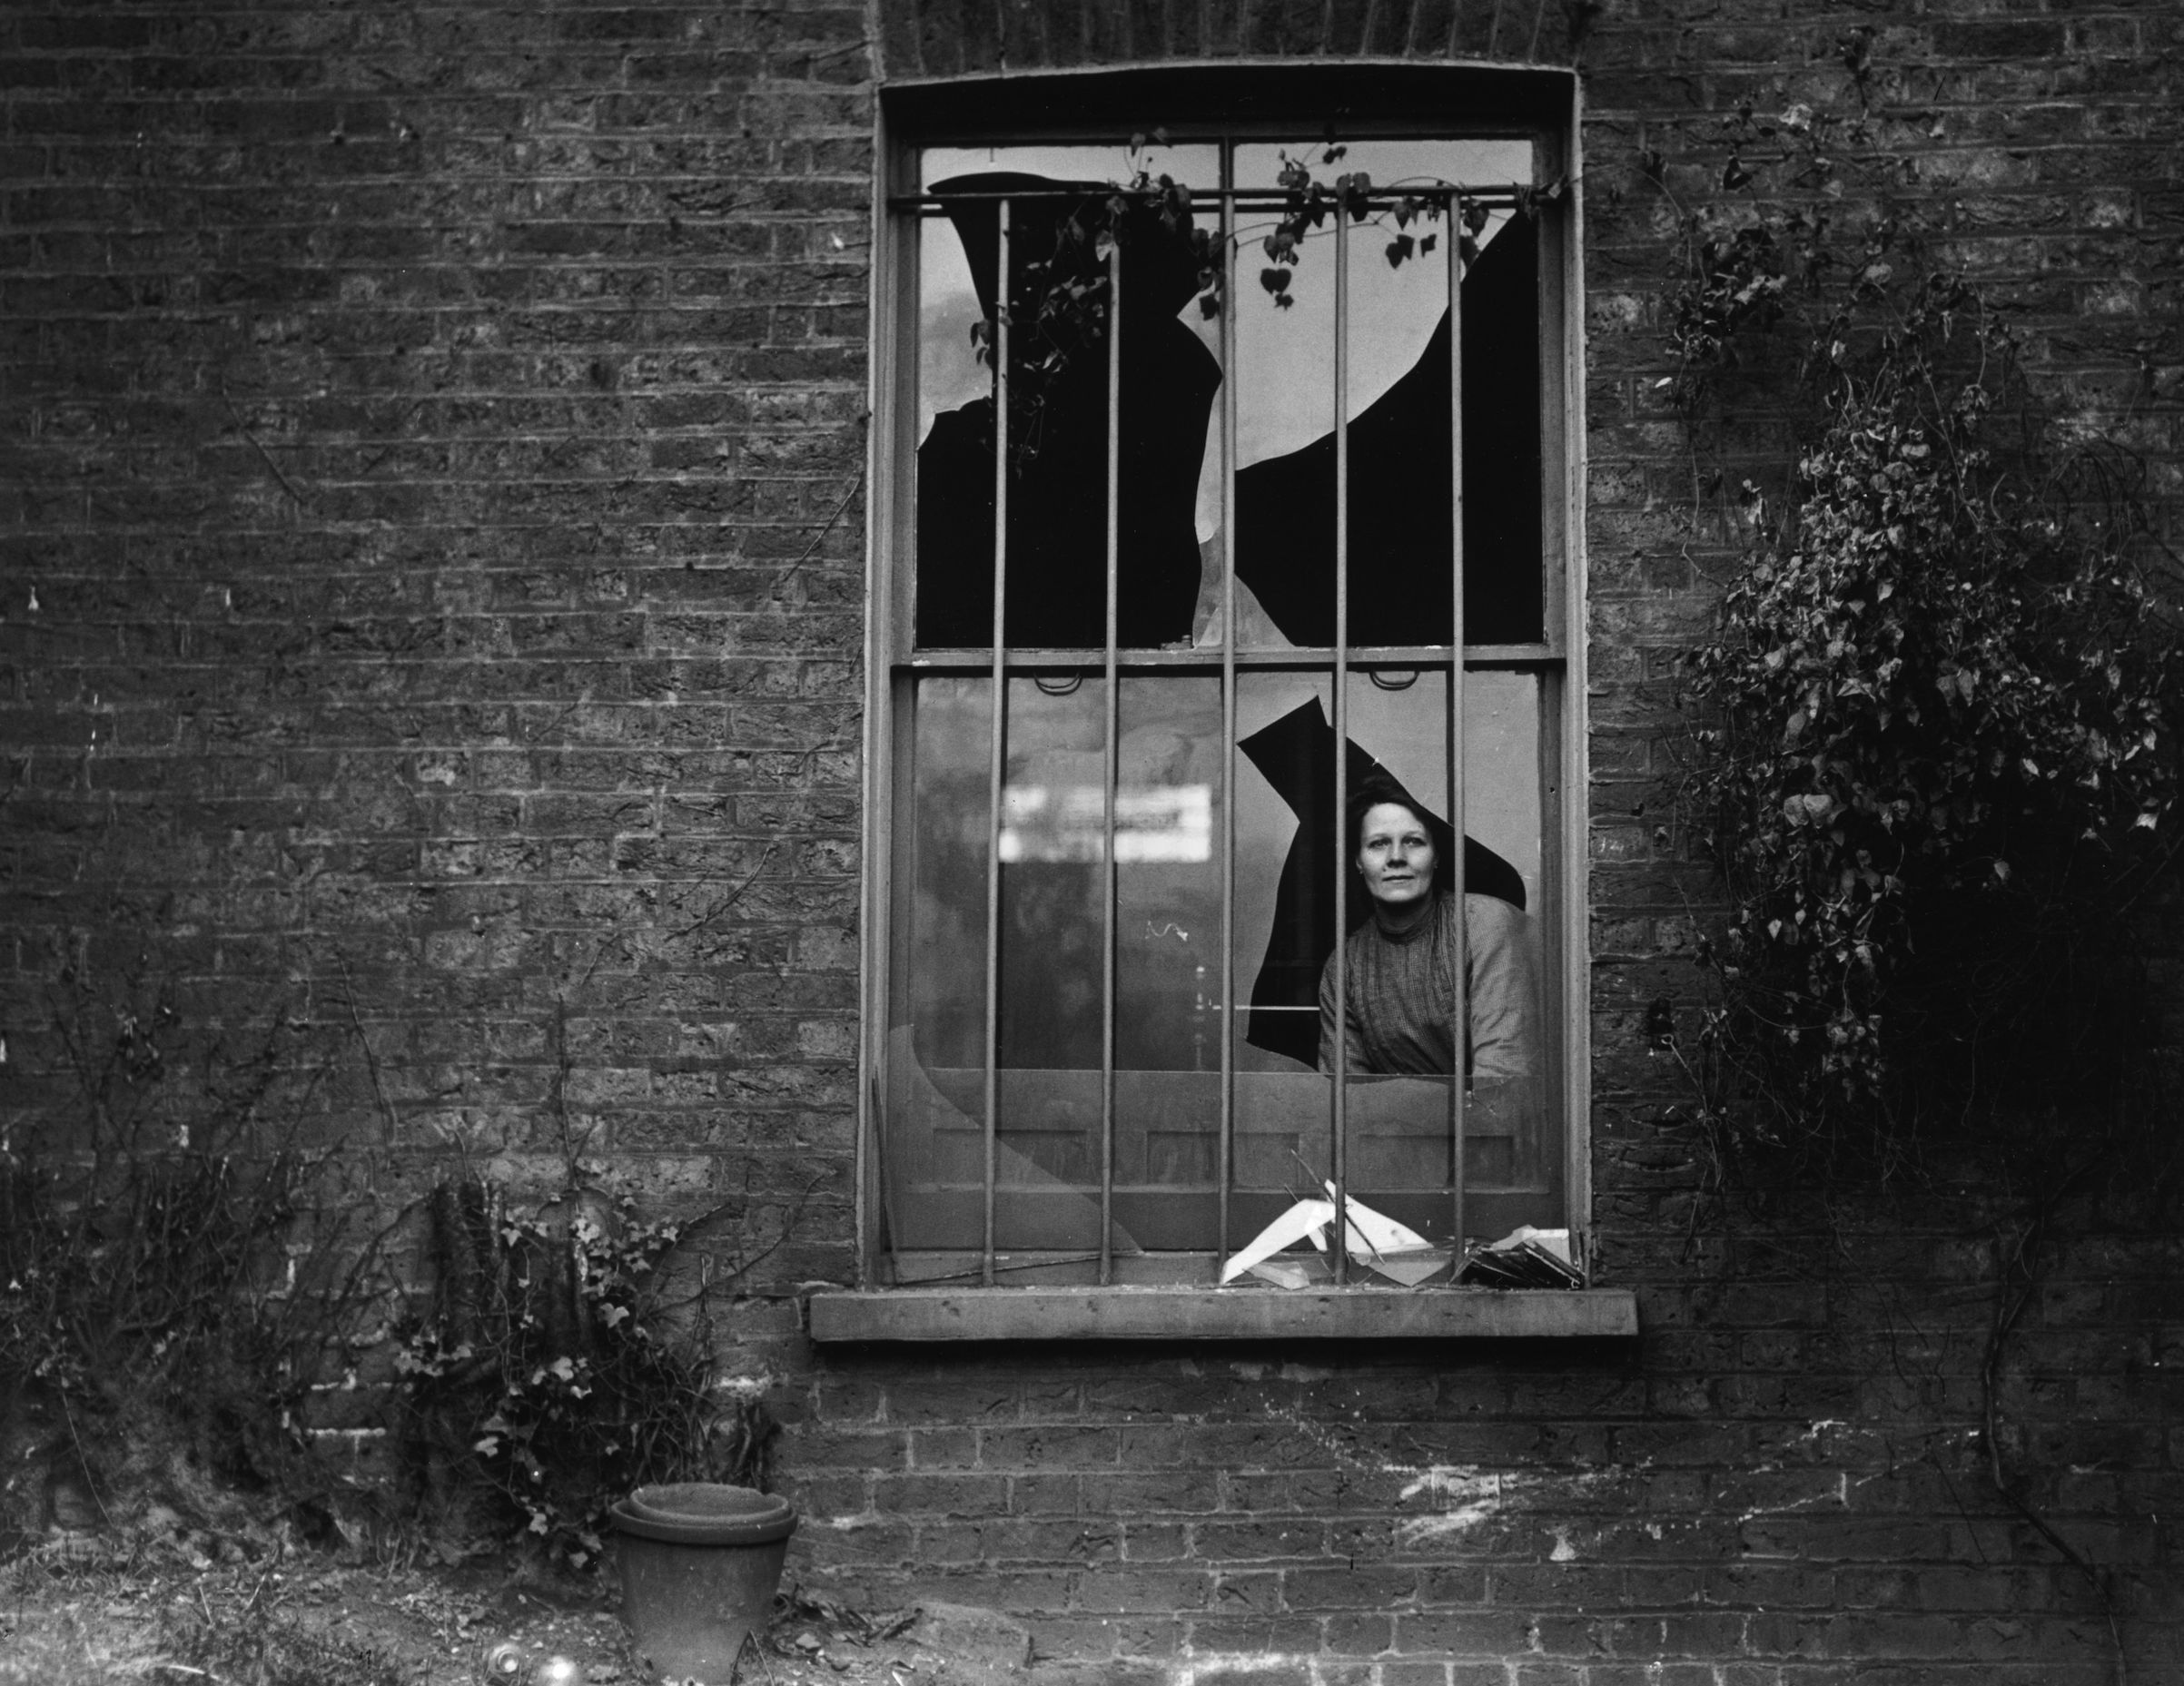 A woman peers through a shattered window the day after a bomb attack by suffragettes on nearby Holloway prison, Dec. 19, 1913. No-one was arrested for the attack, but suspicion fell on the Women's Social and Political Union (WSPU). (Topical Press Agency / Getty Images)